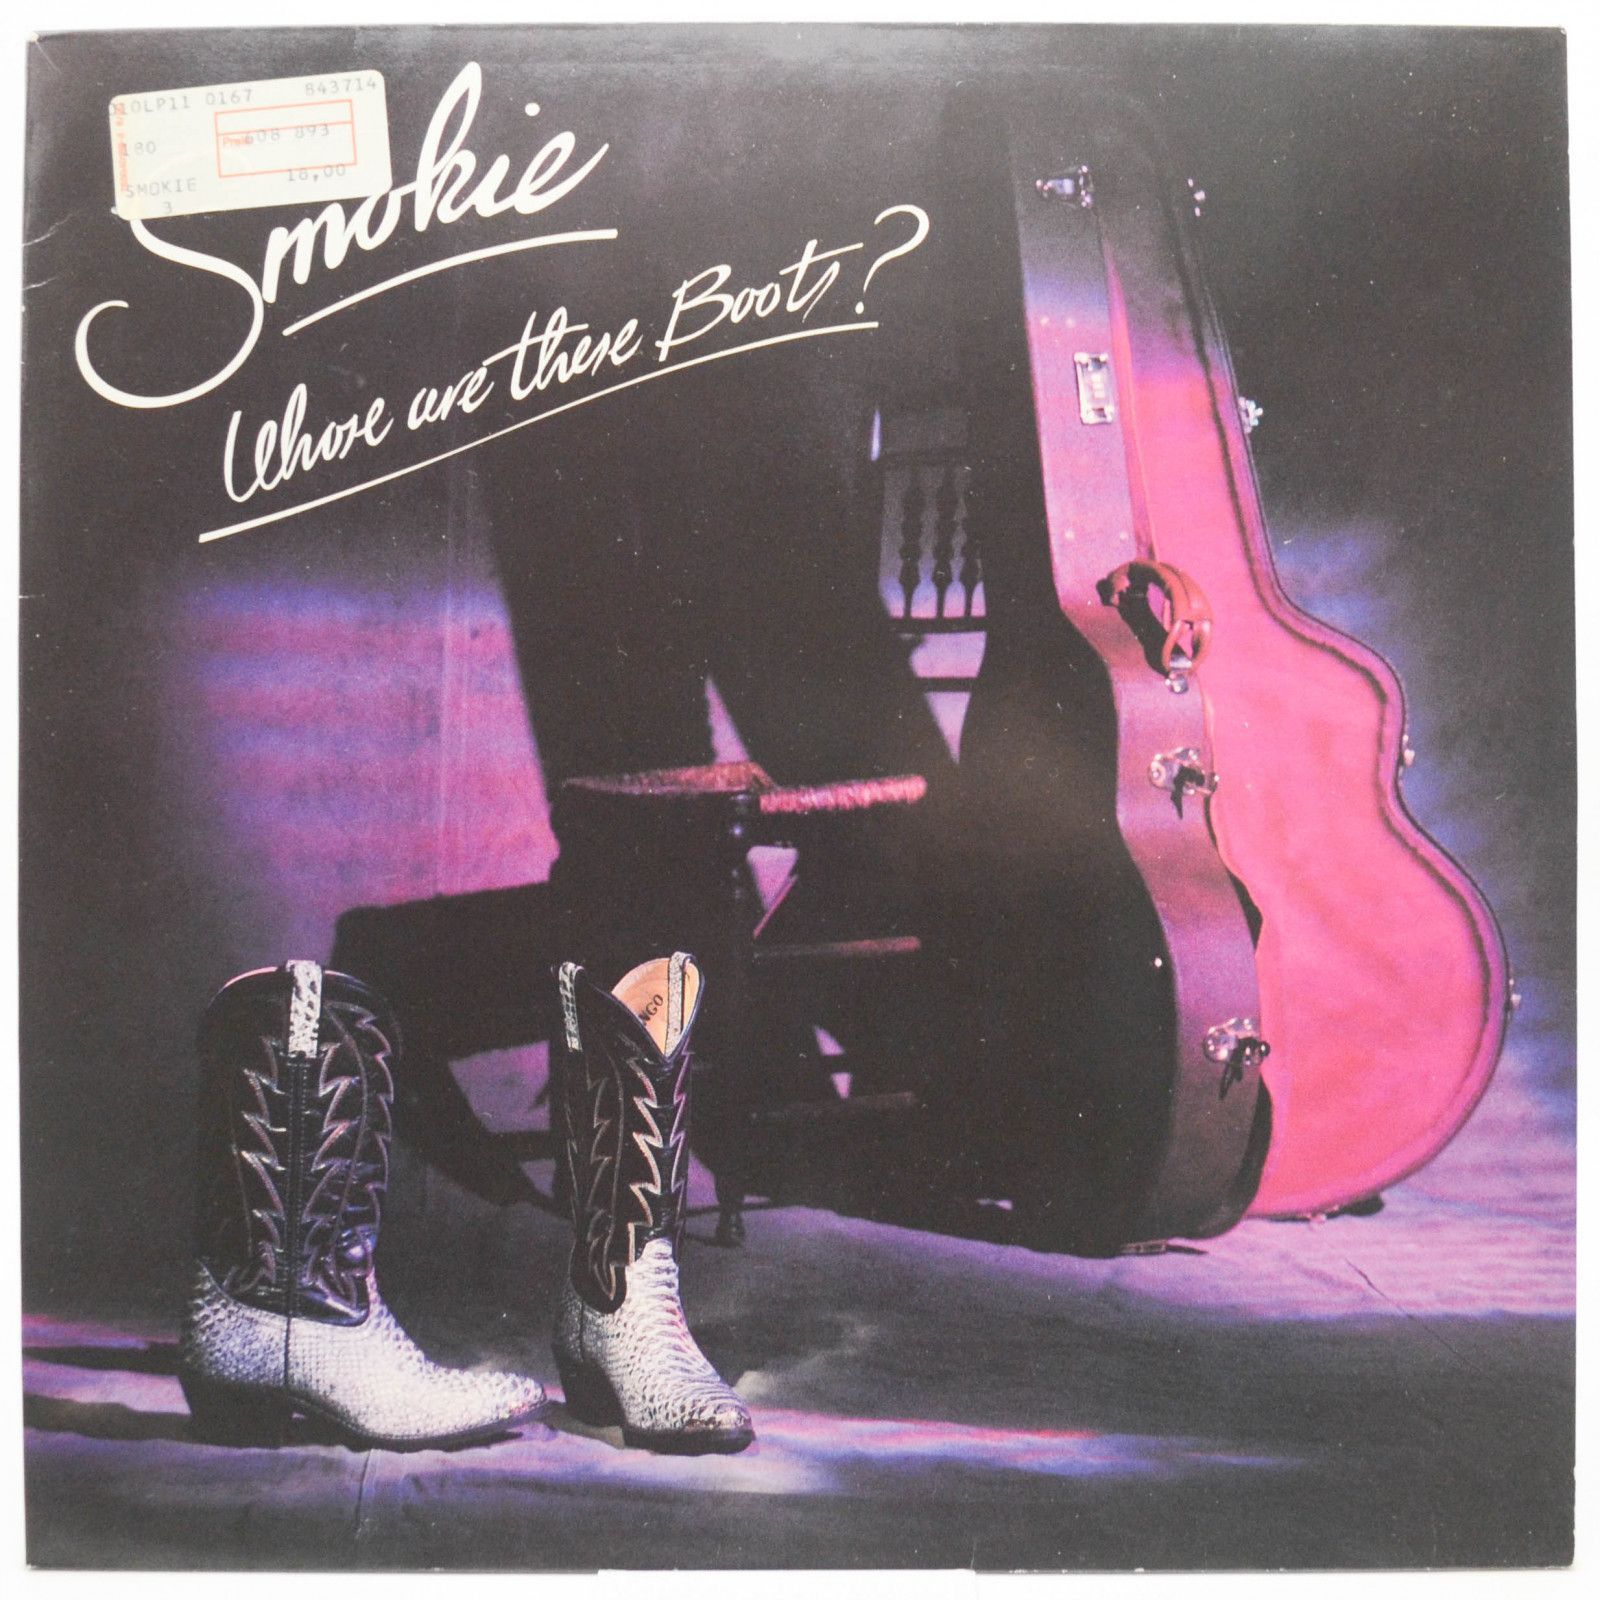 Smokie — Whose Are These Boots, 1990